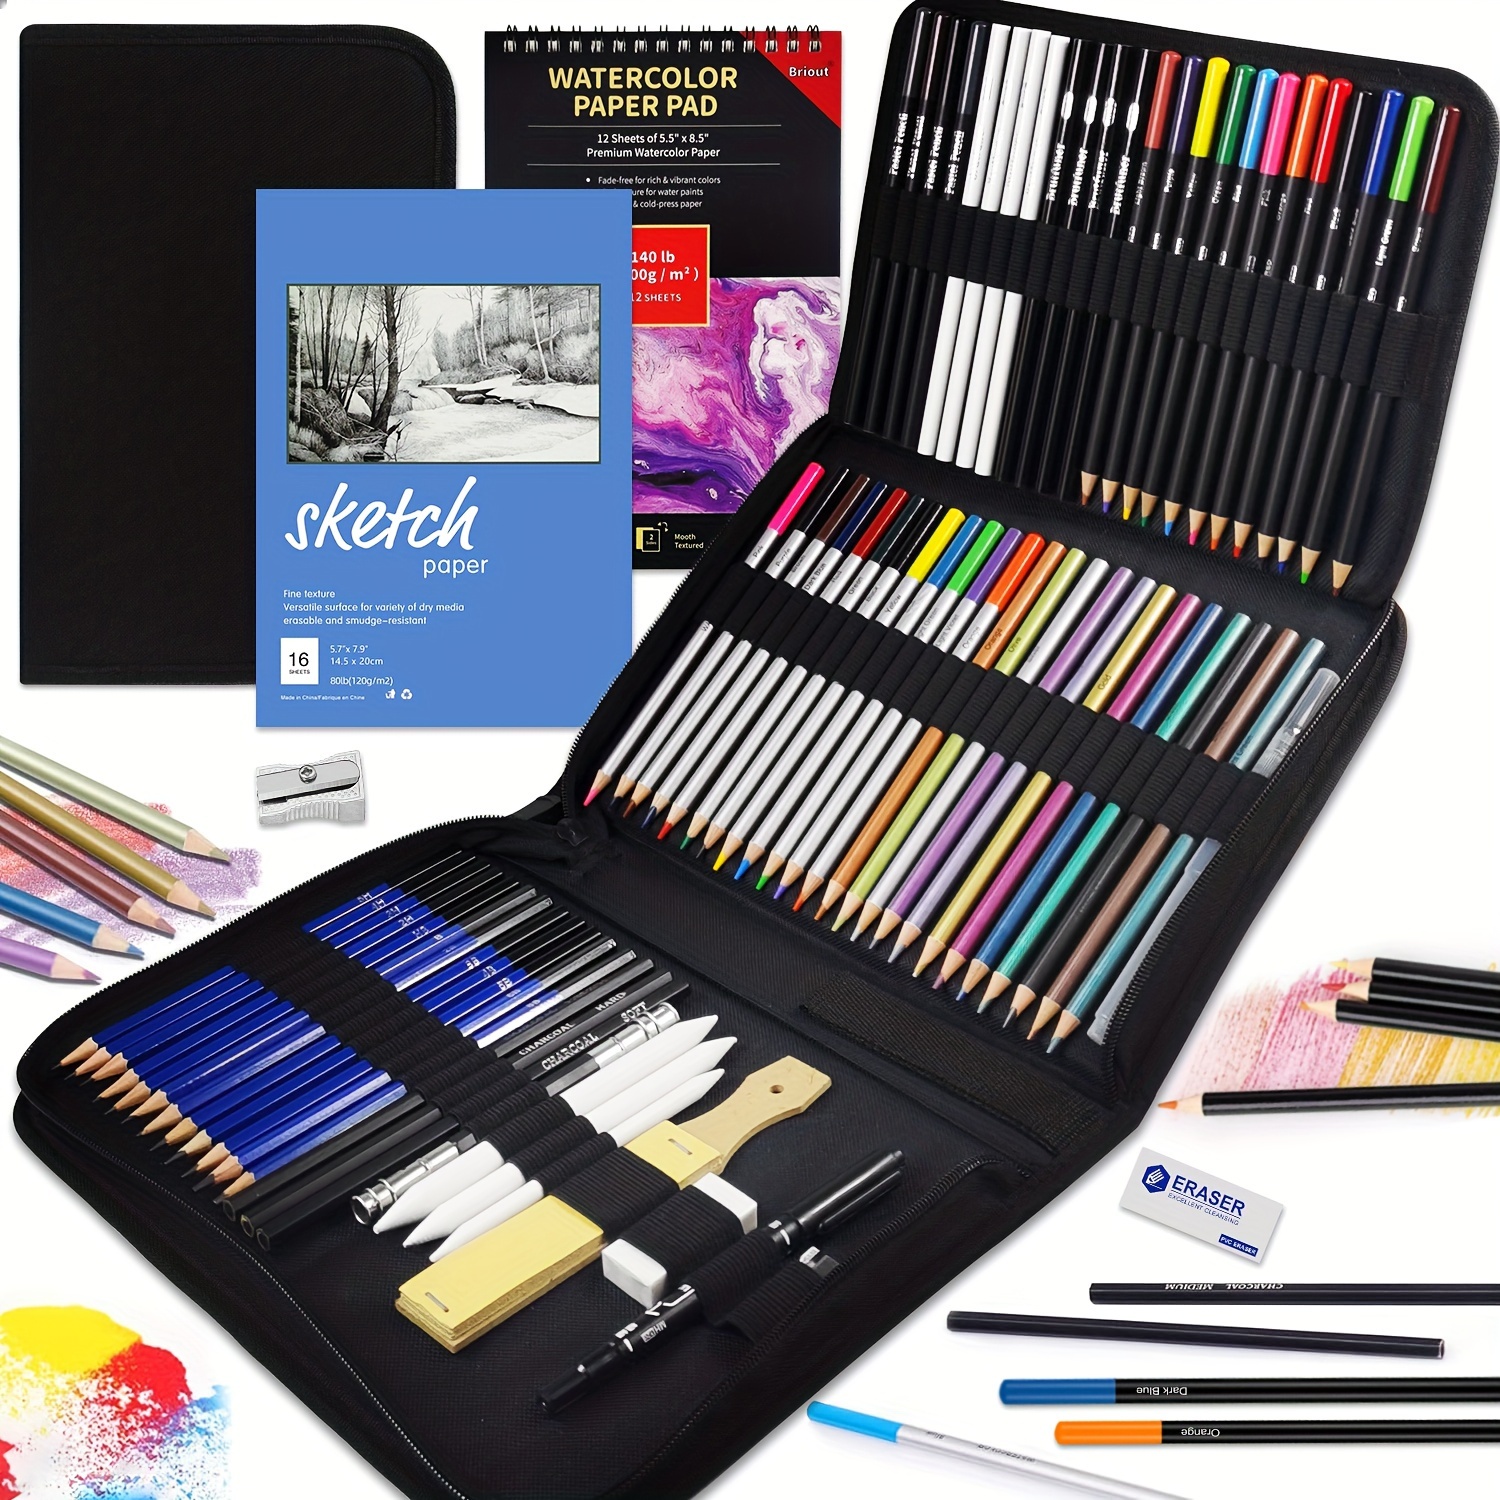 

75-piece Painting Set Sketch Set, Professional Art Supplies, Equipped With 2 Sketch Books, Colored Pencils, Graphite, Charcoal, Watercolor, Metal Pencil, Suitable For Artists, Adults, And Beginners